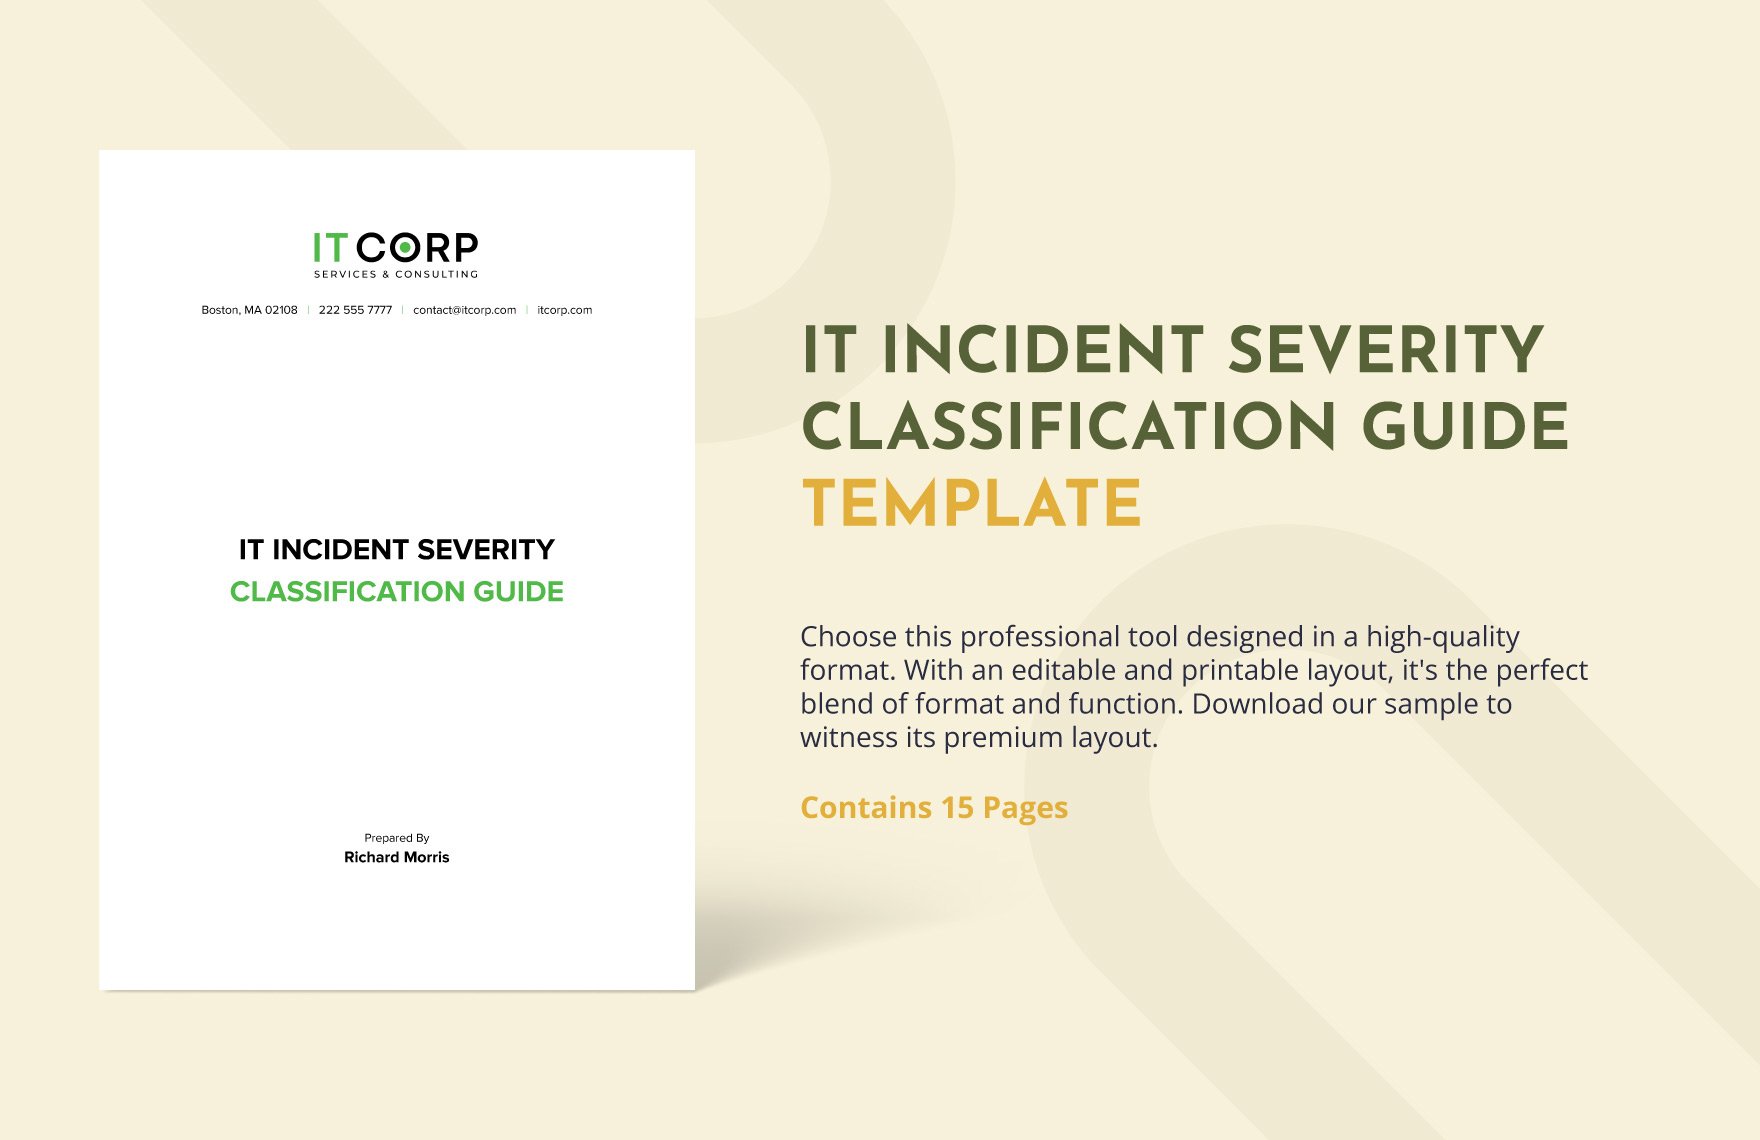 IT Incident Severity Classification Guide Template